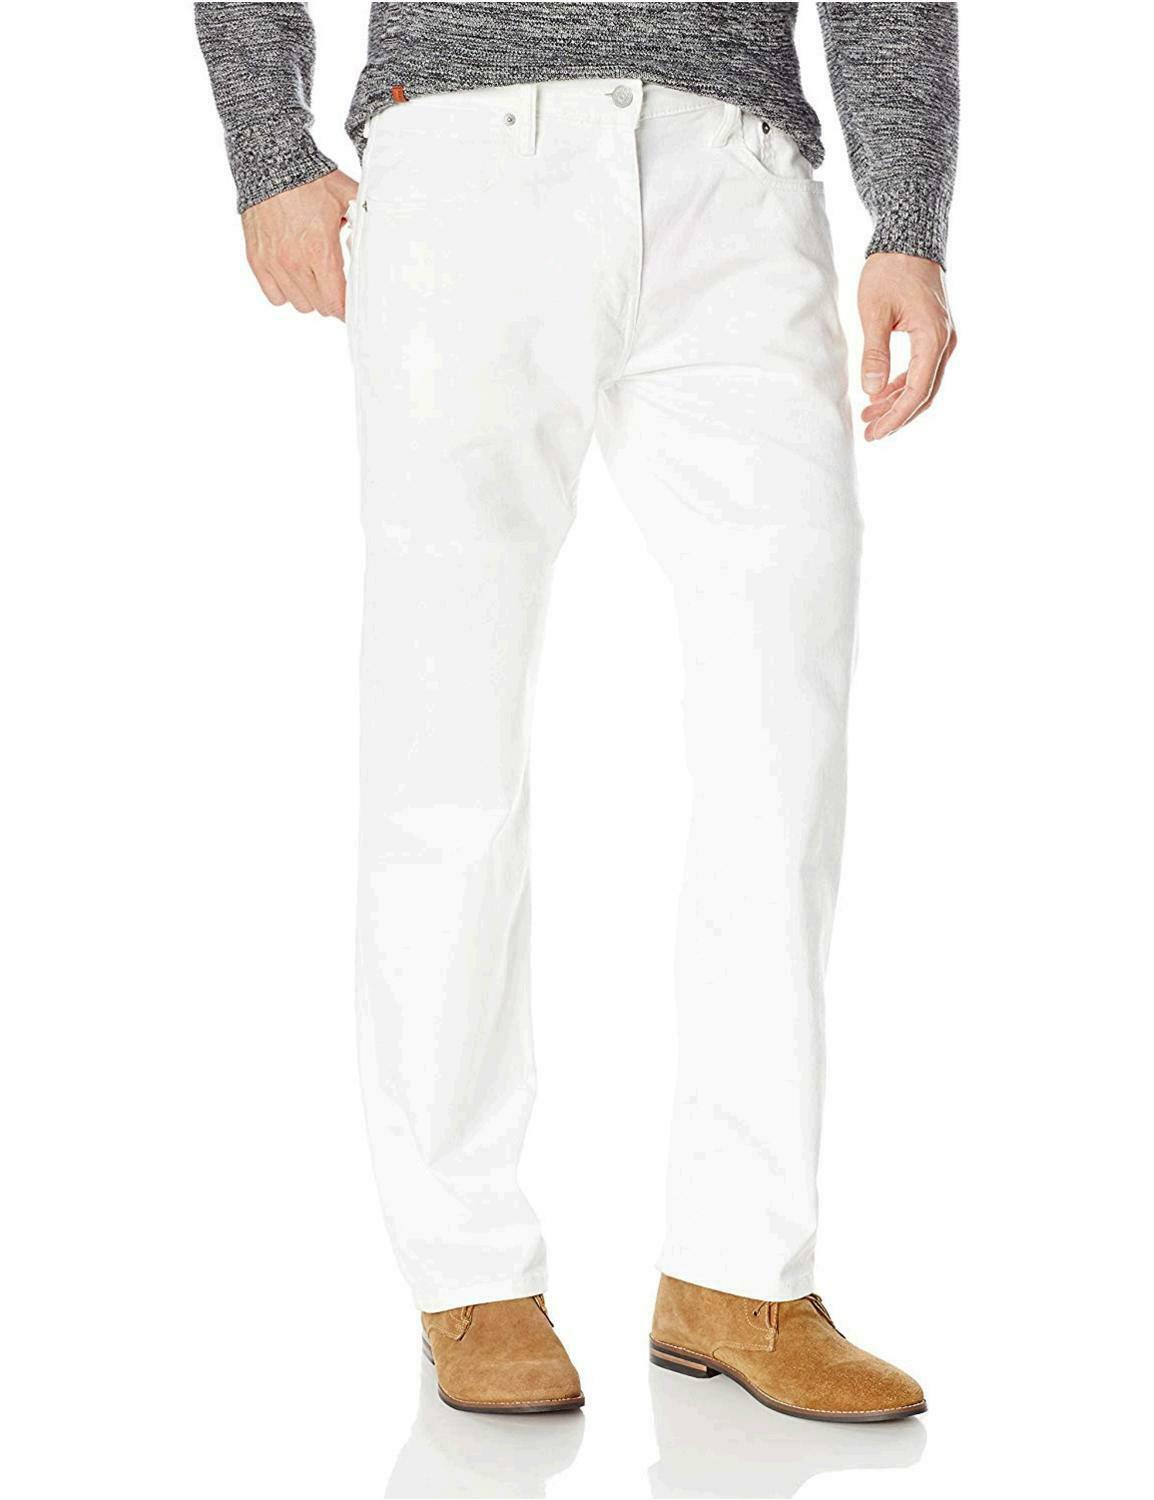 Levi's Men's 569™ Loose Straight Fit Jeans White Size 31x30